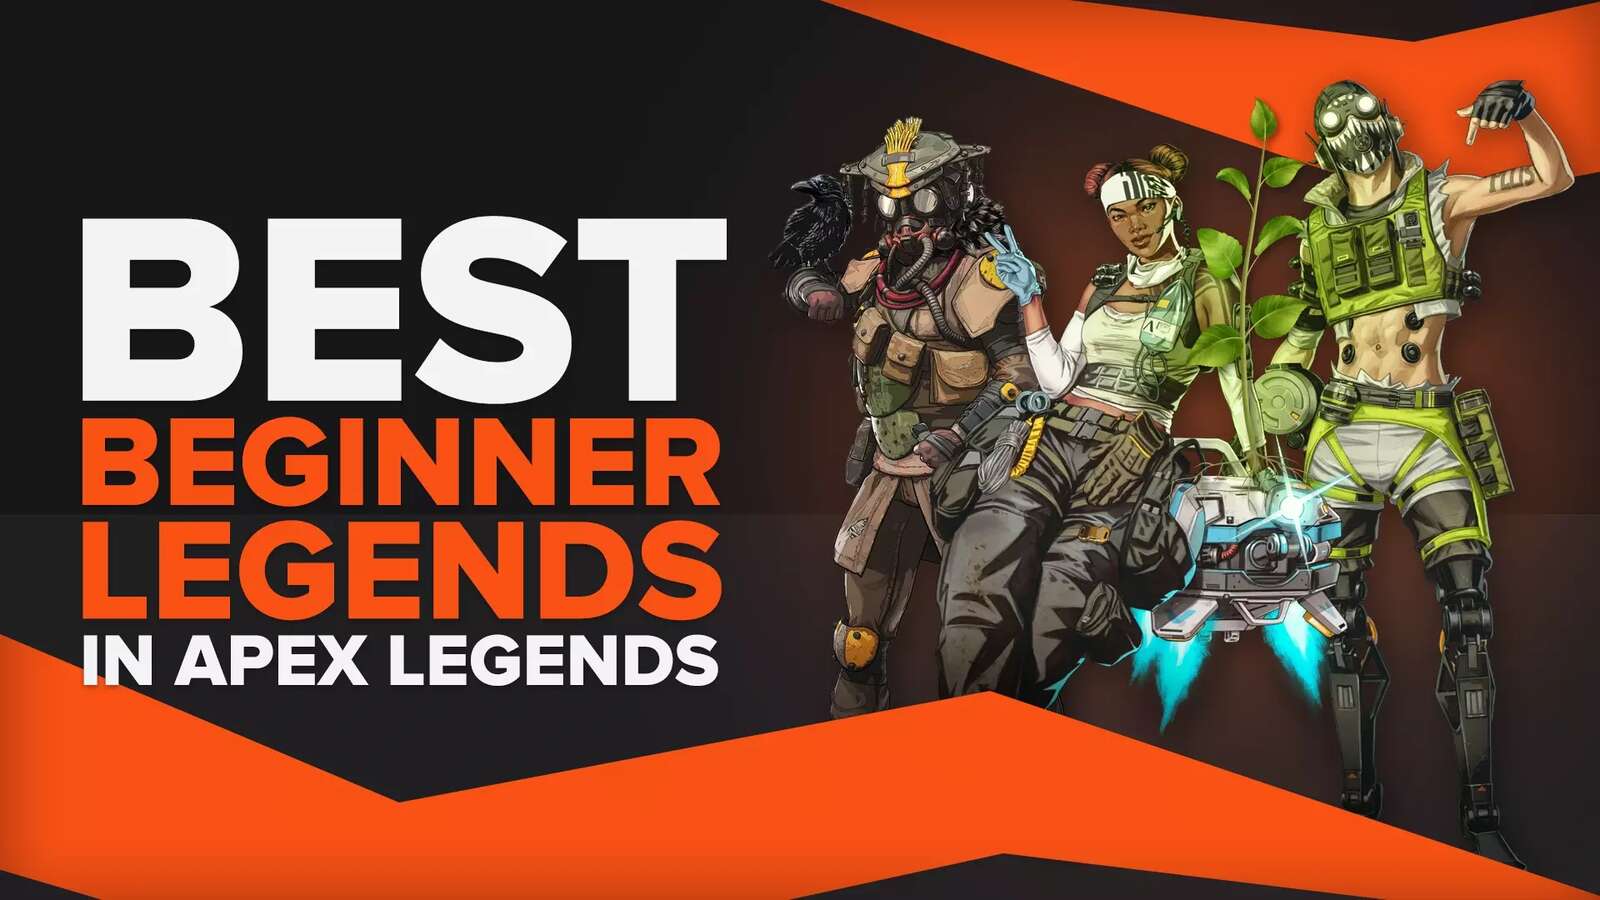 The 5 Best Legends for Beginners in Apex Legends